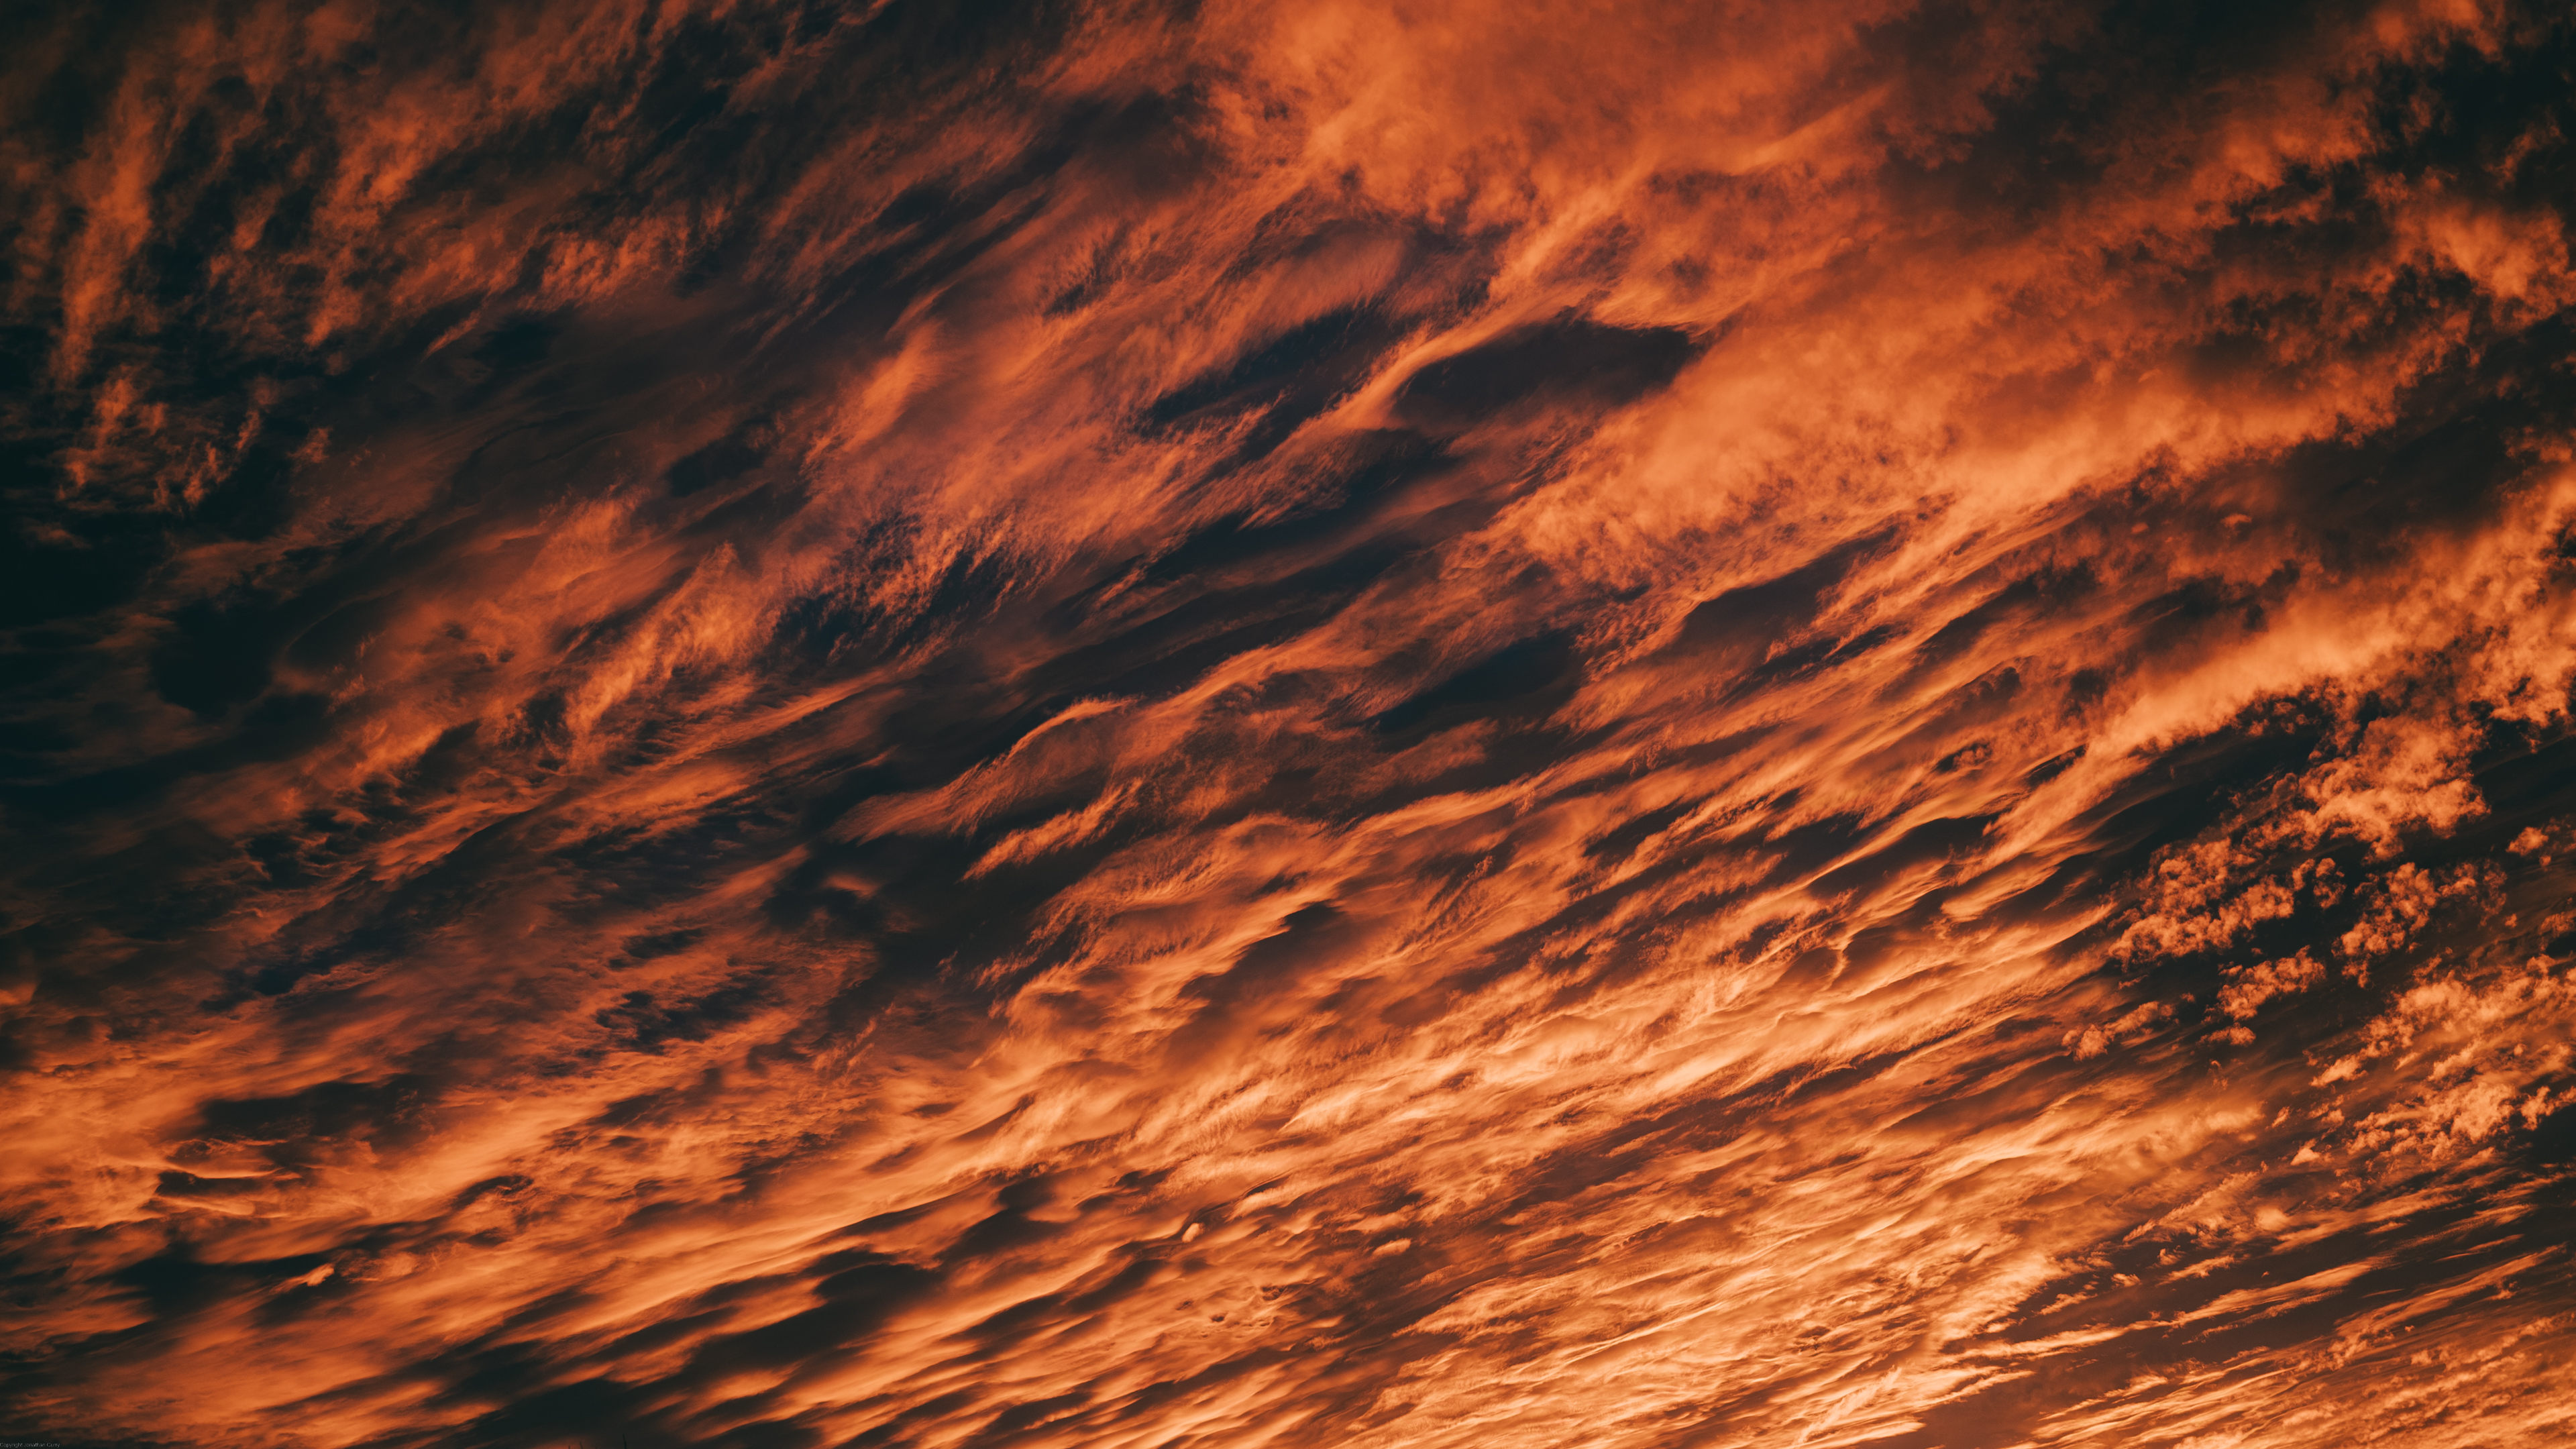 Nature Photography Sunset Clouds Fire Abstract Texture Outdoors Landscape Orange 3840x2160